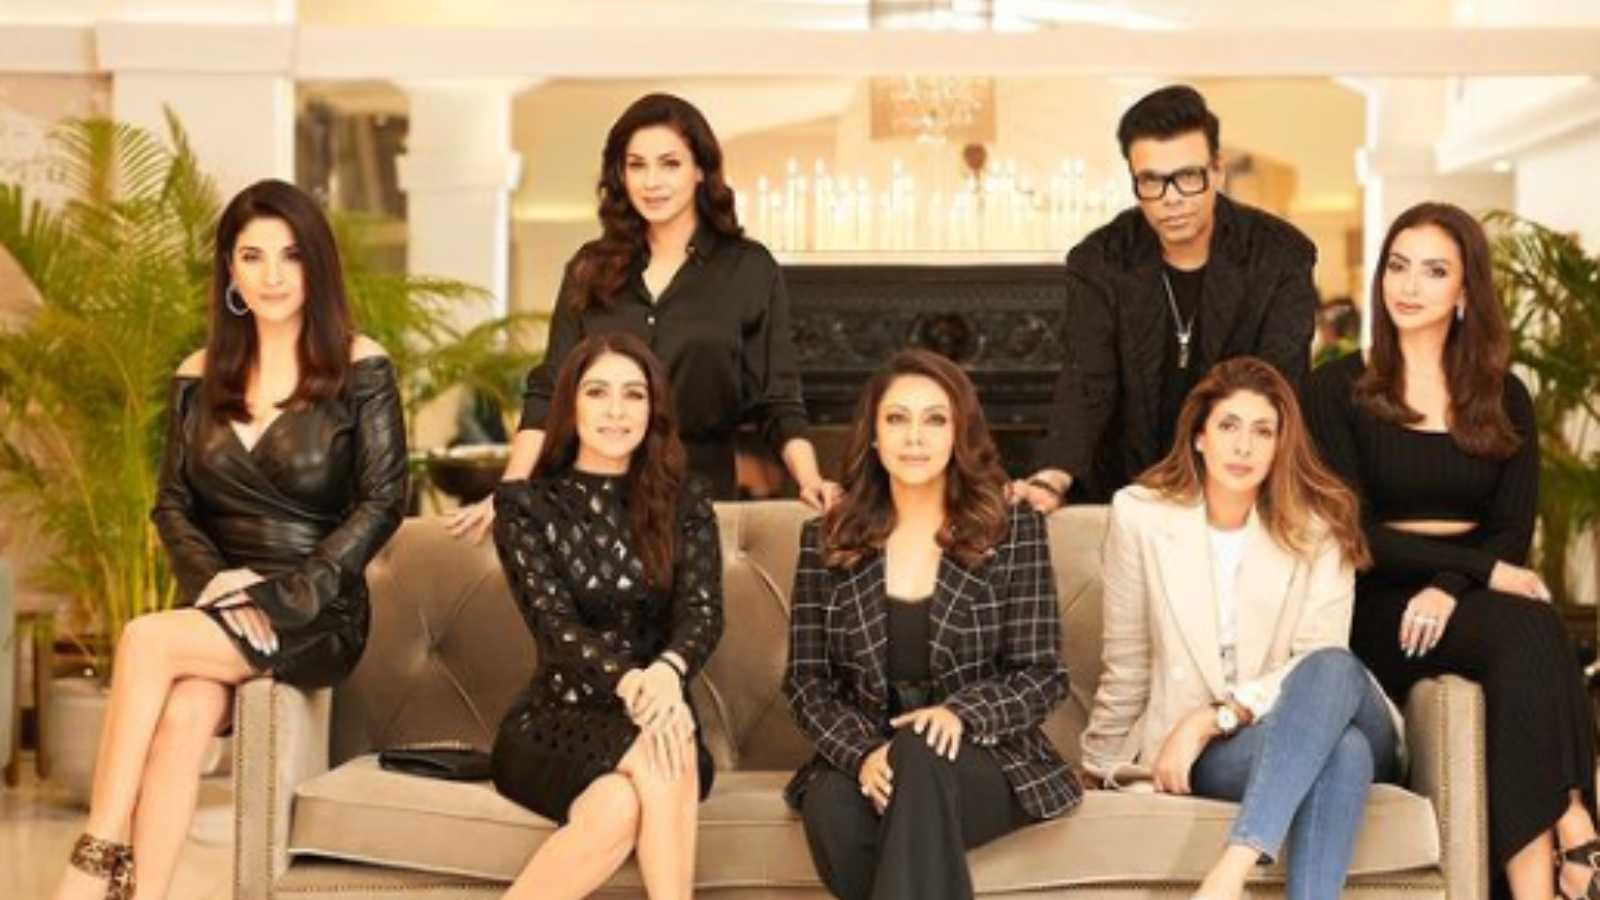 Bollywood wives star cast have a 'fabulous' net worth too, take a look at the jaw-dropping numbers